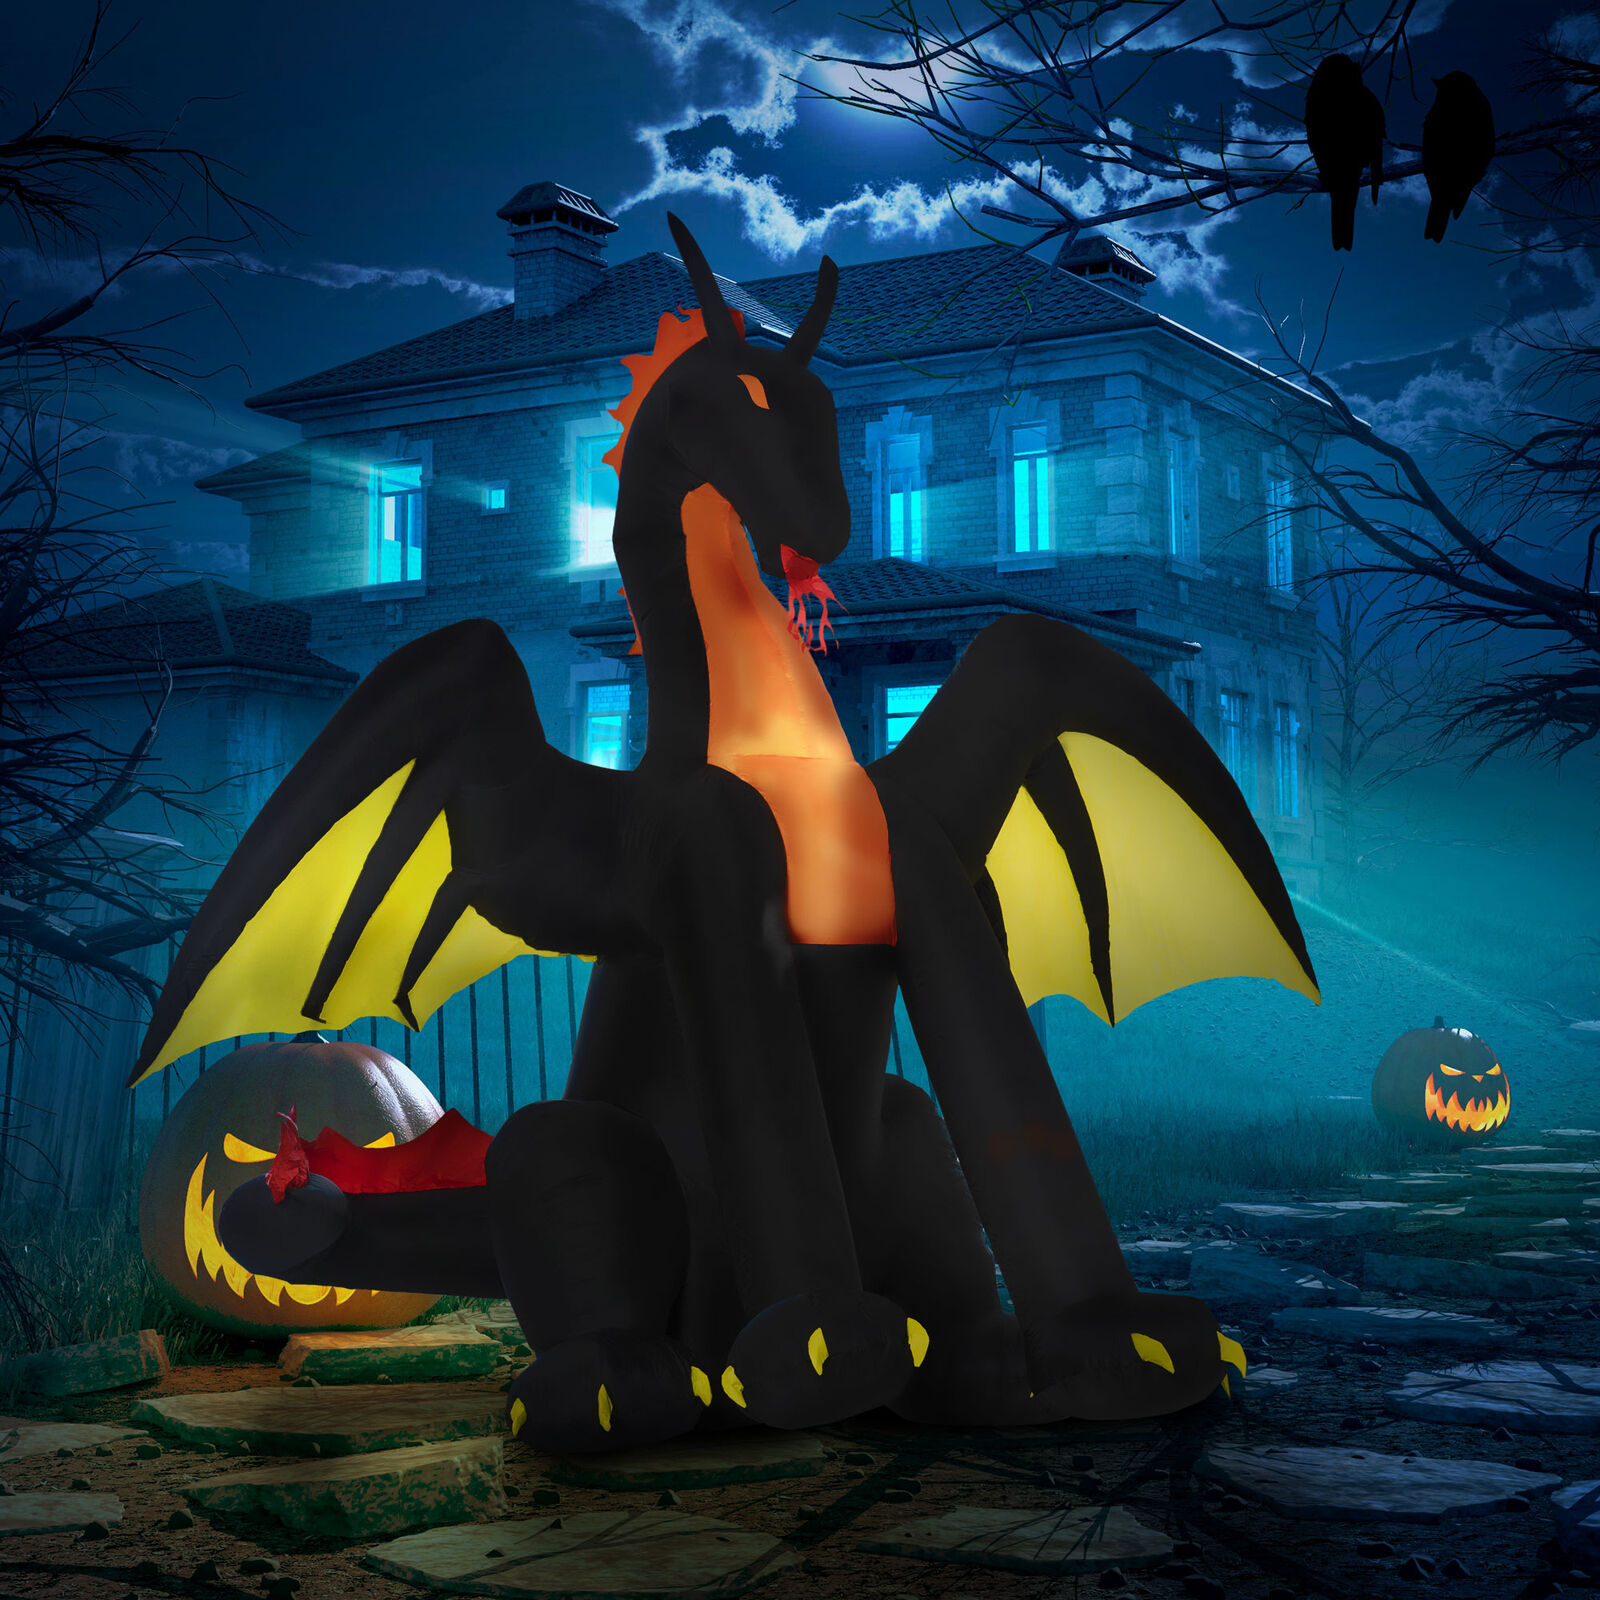 6' Inflatable Halloween Fire & Ice Dragon Blow-Up Outdoor Display w/ LED Lights